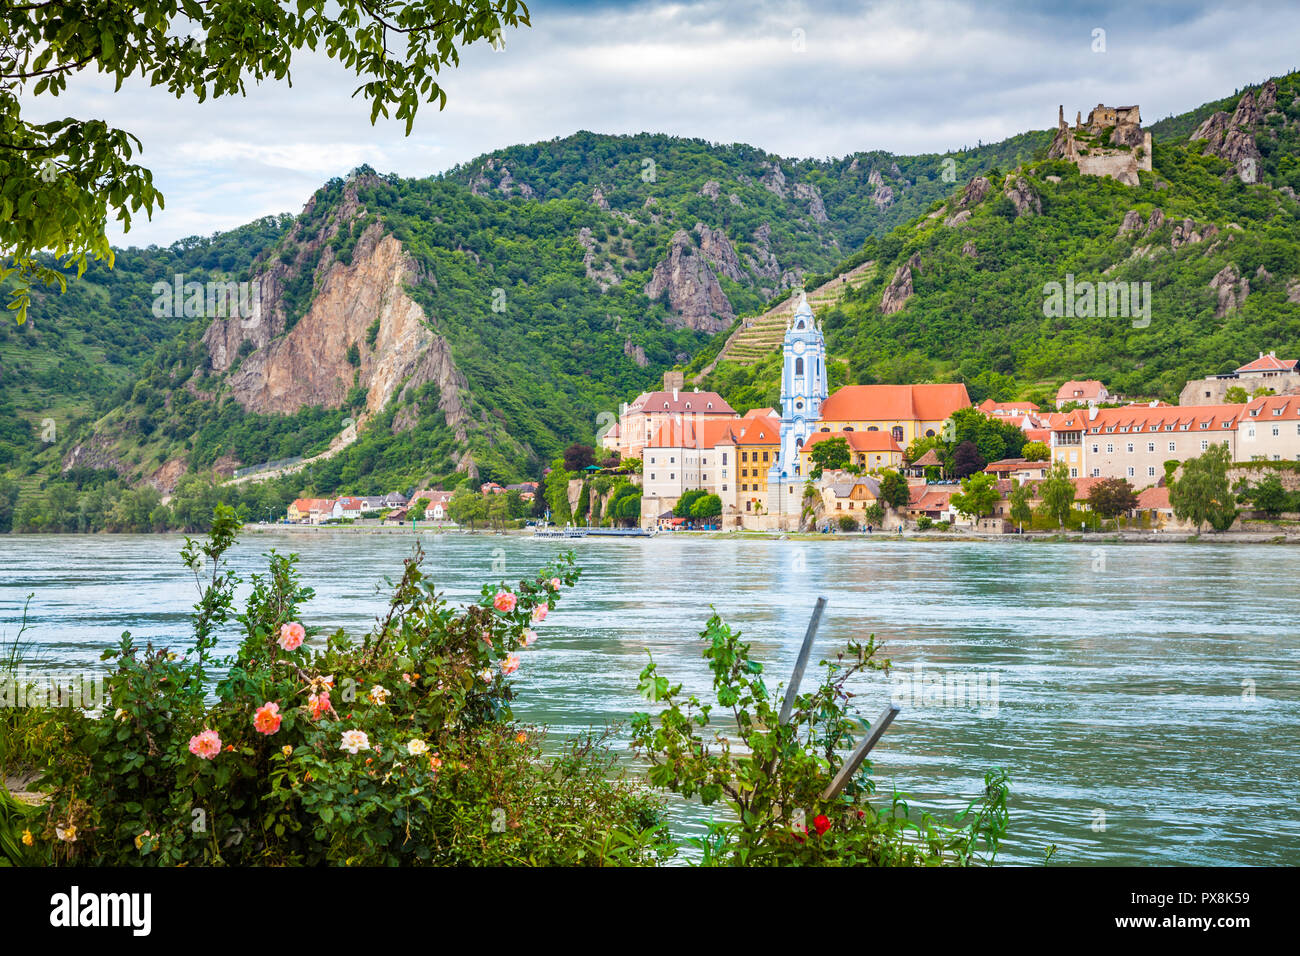 Beautiful landscape with the town of Dürnstein and Danube river in the Wachau valley, Lower Austria Stock Photo